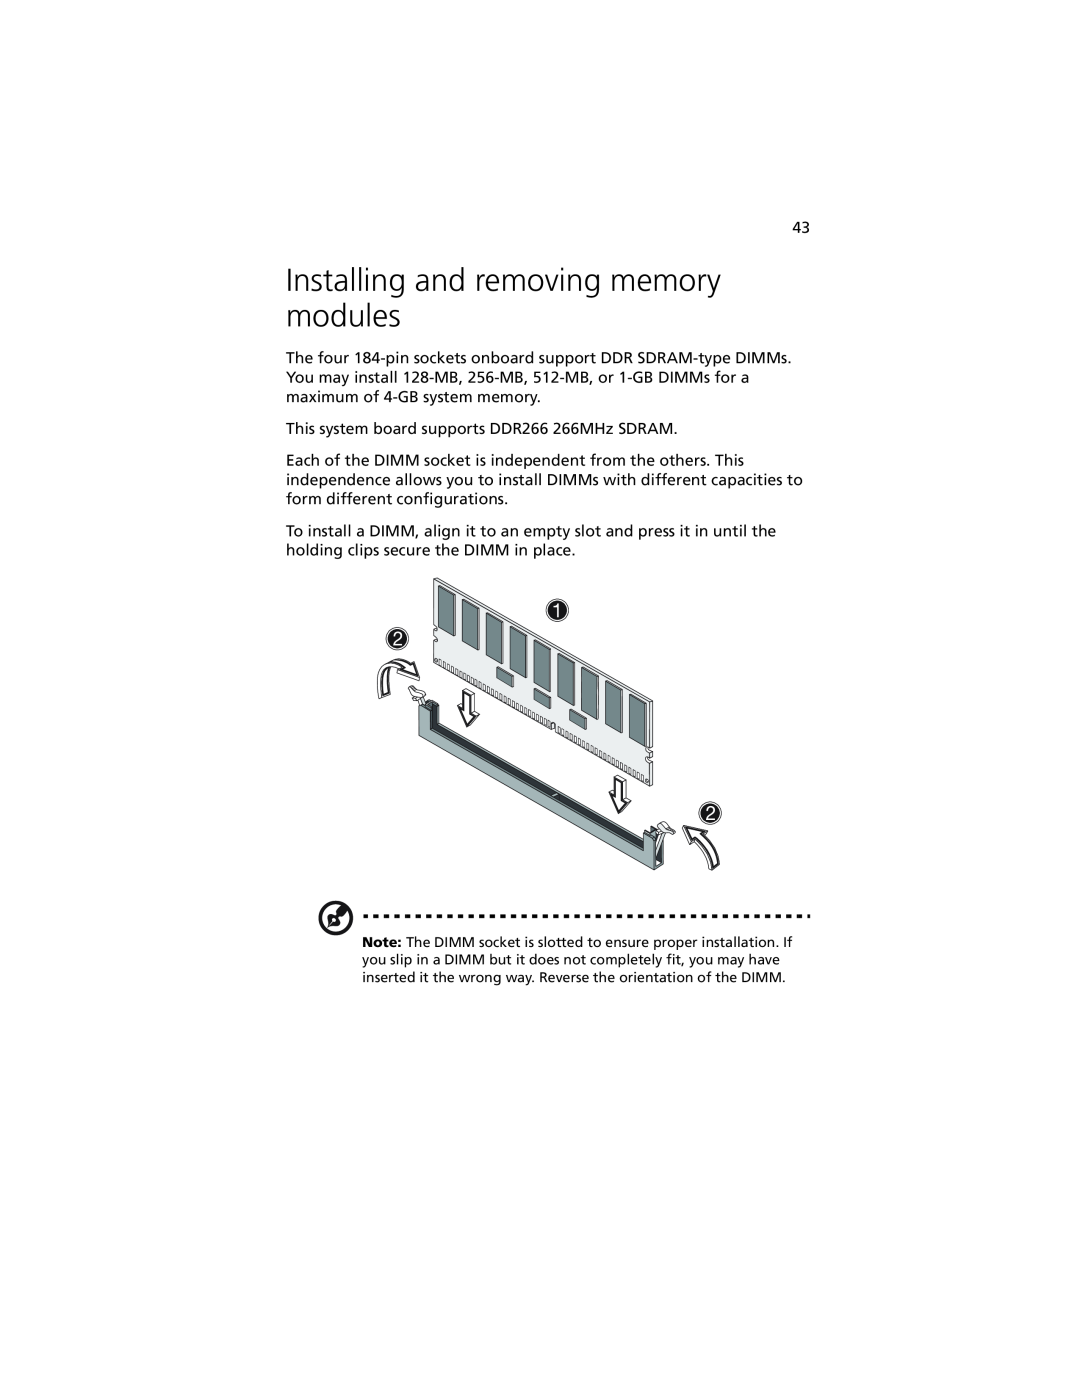 Acer G301 manual Installing and removing memory modules 